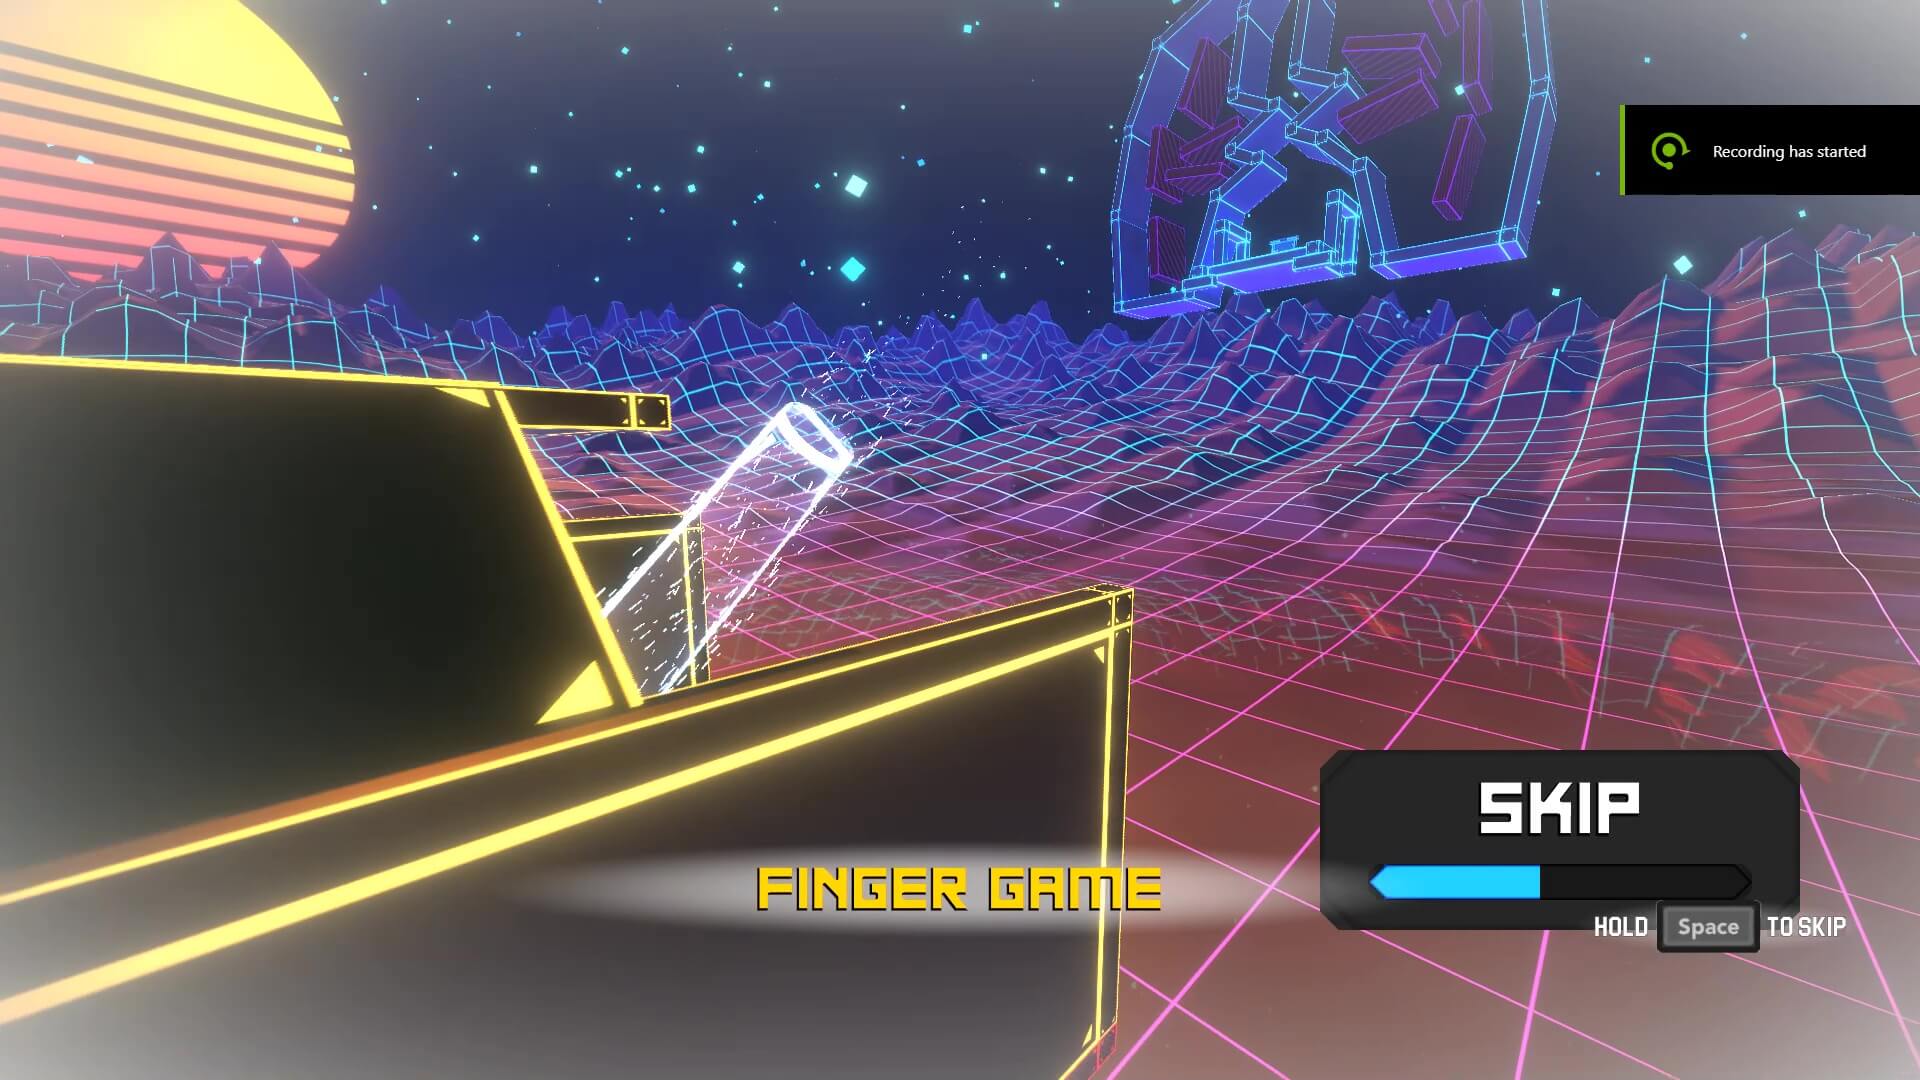 The Finger Game level in Cyber Hook